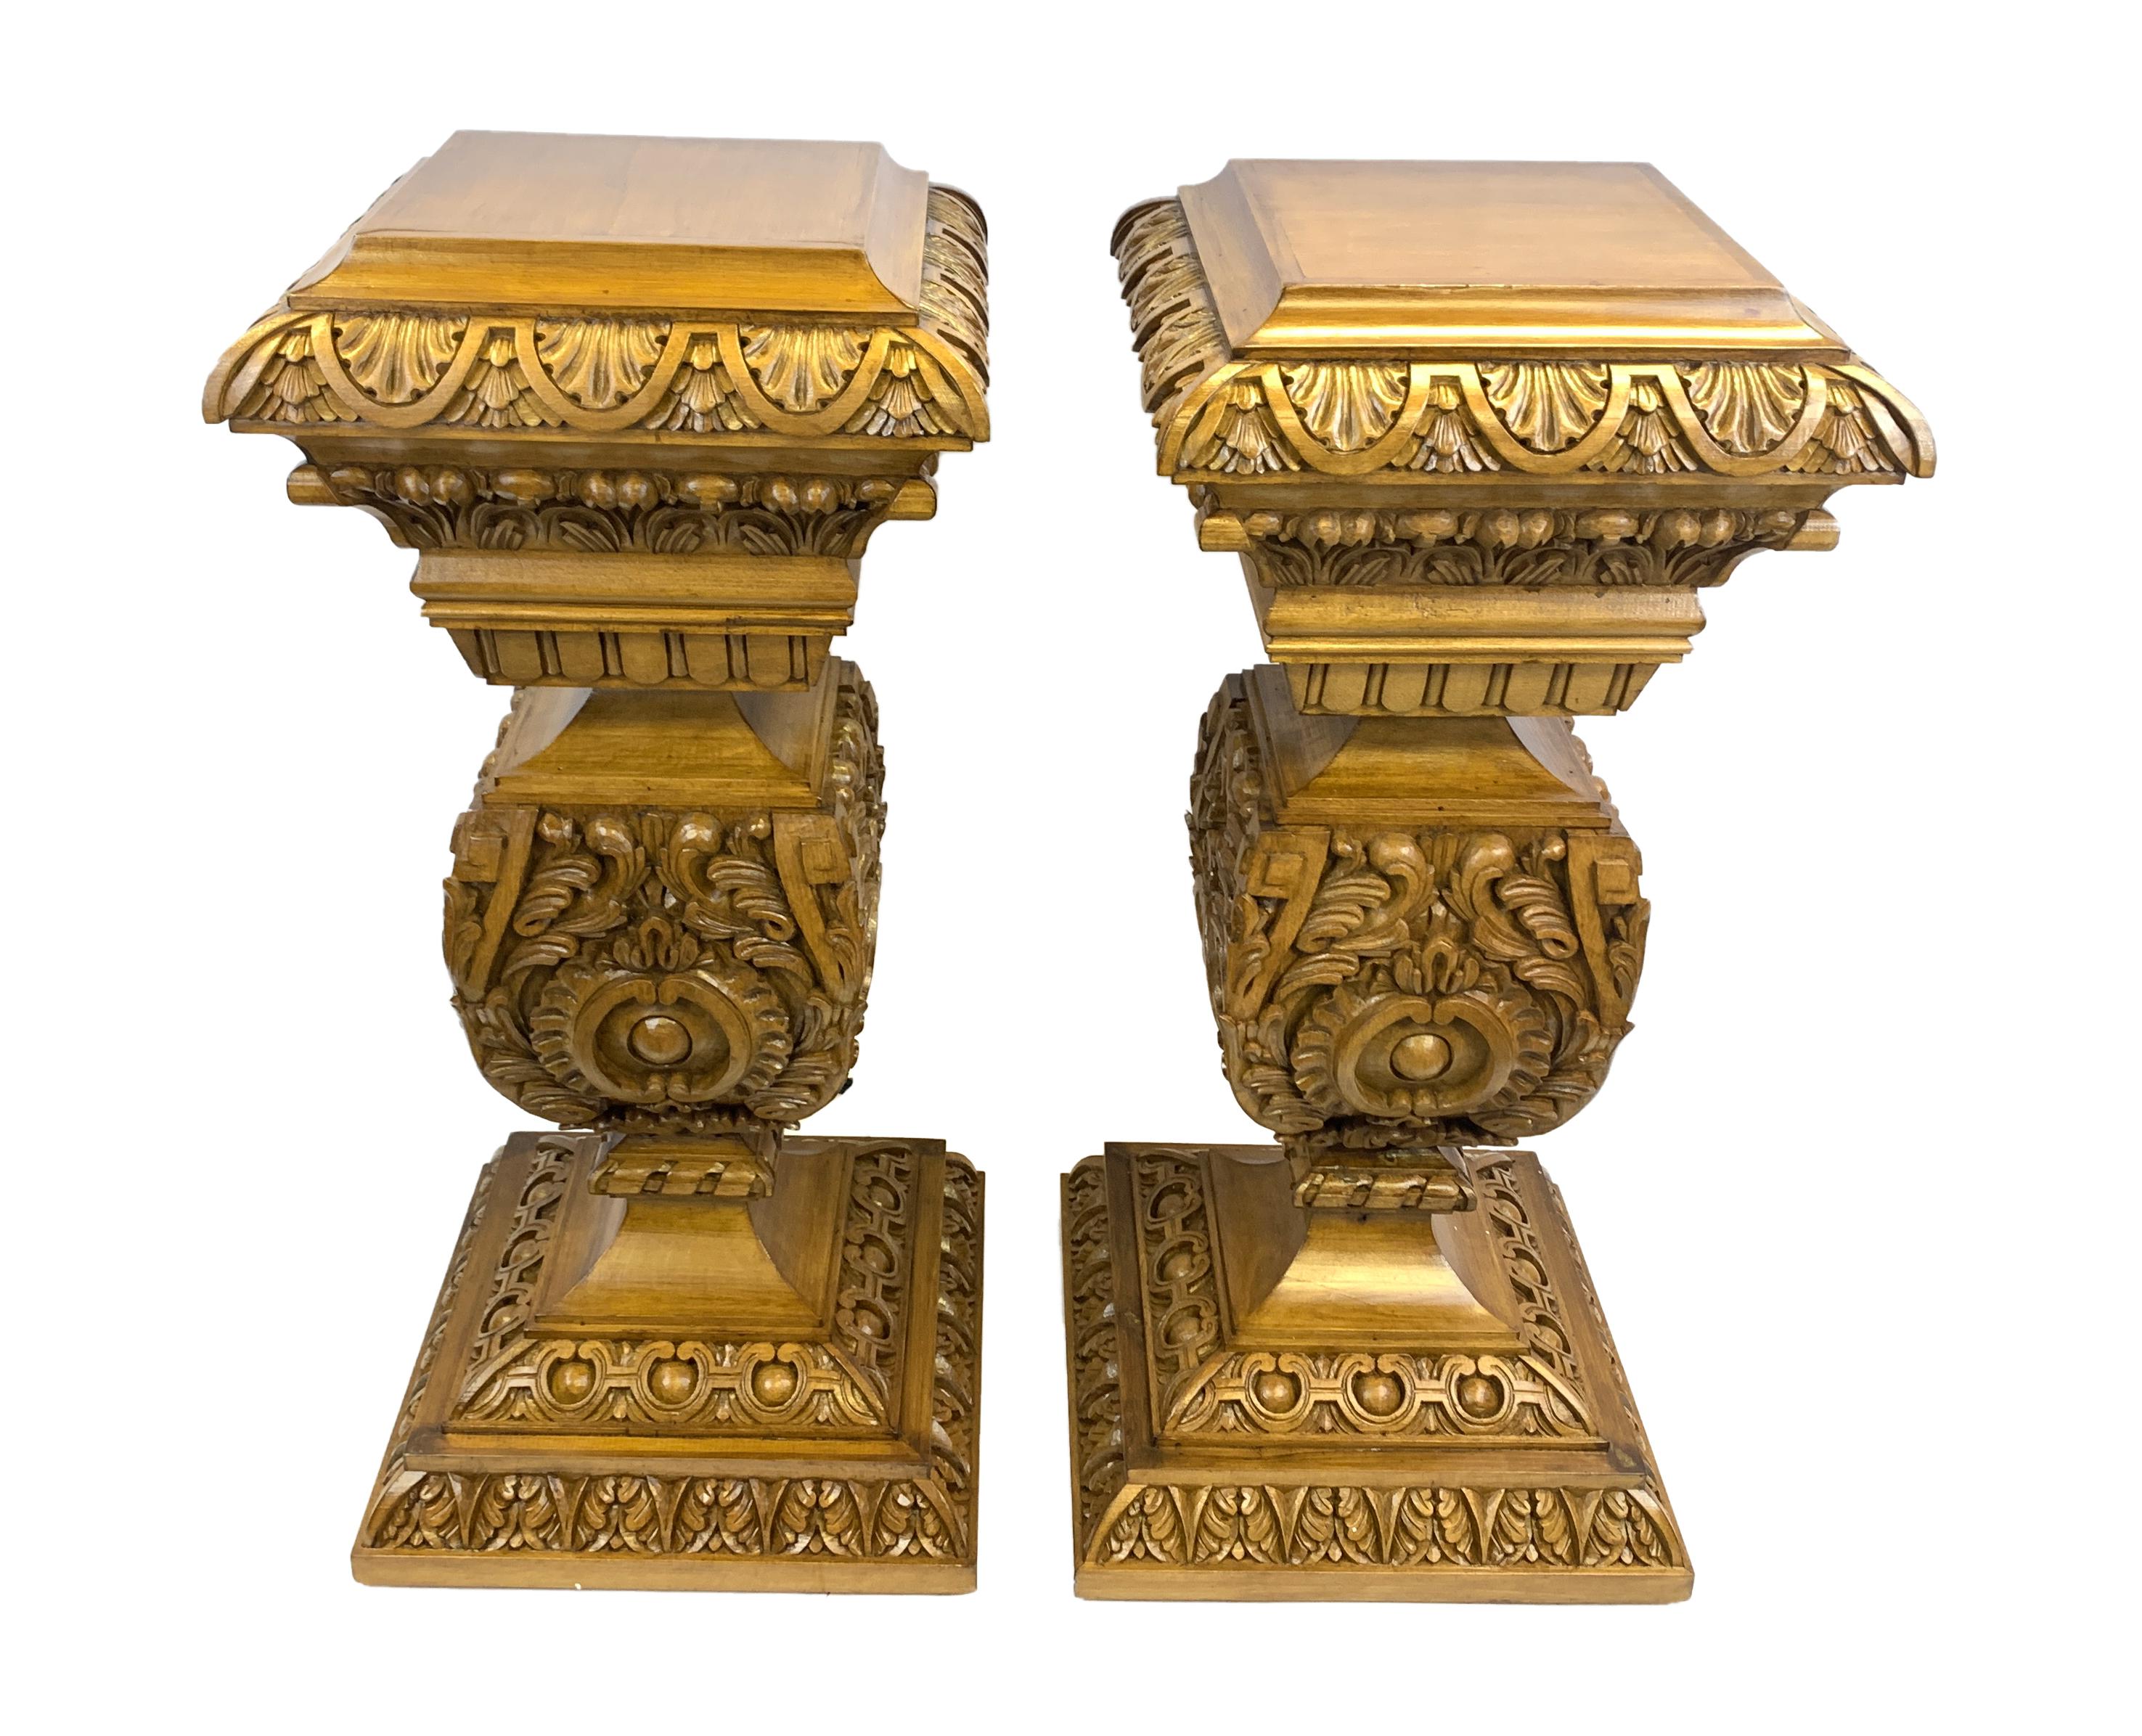 A fine pair of baroque style pedestals, rich in details and colour, carved from beech wood.